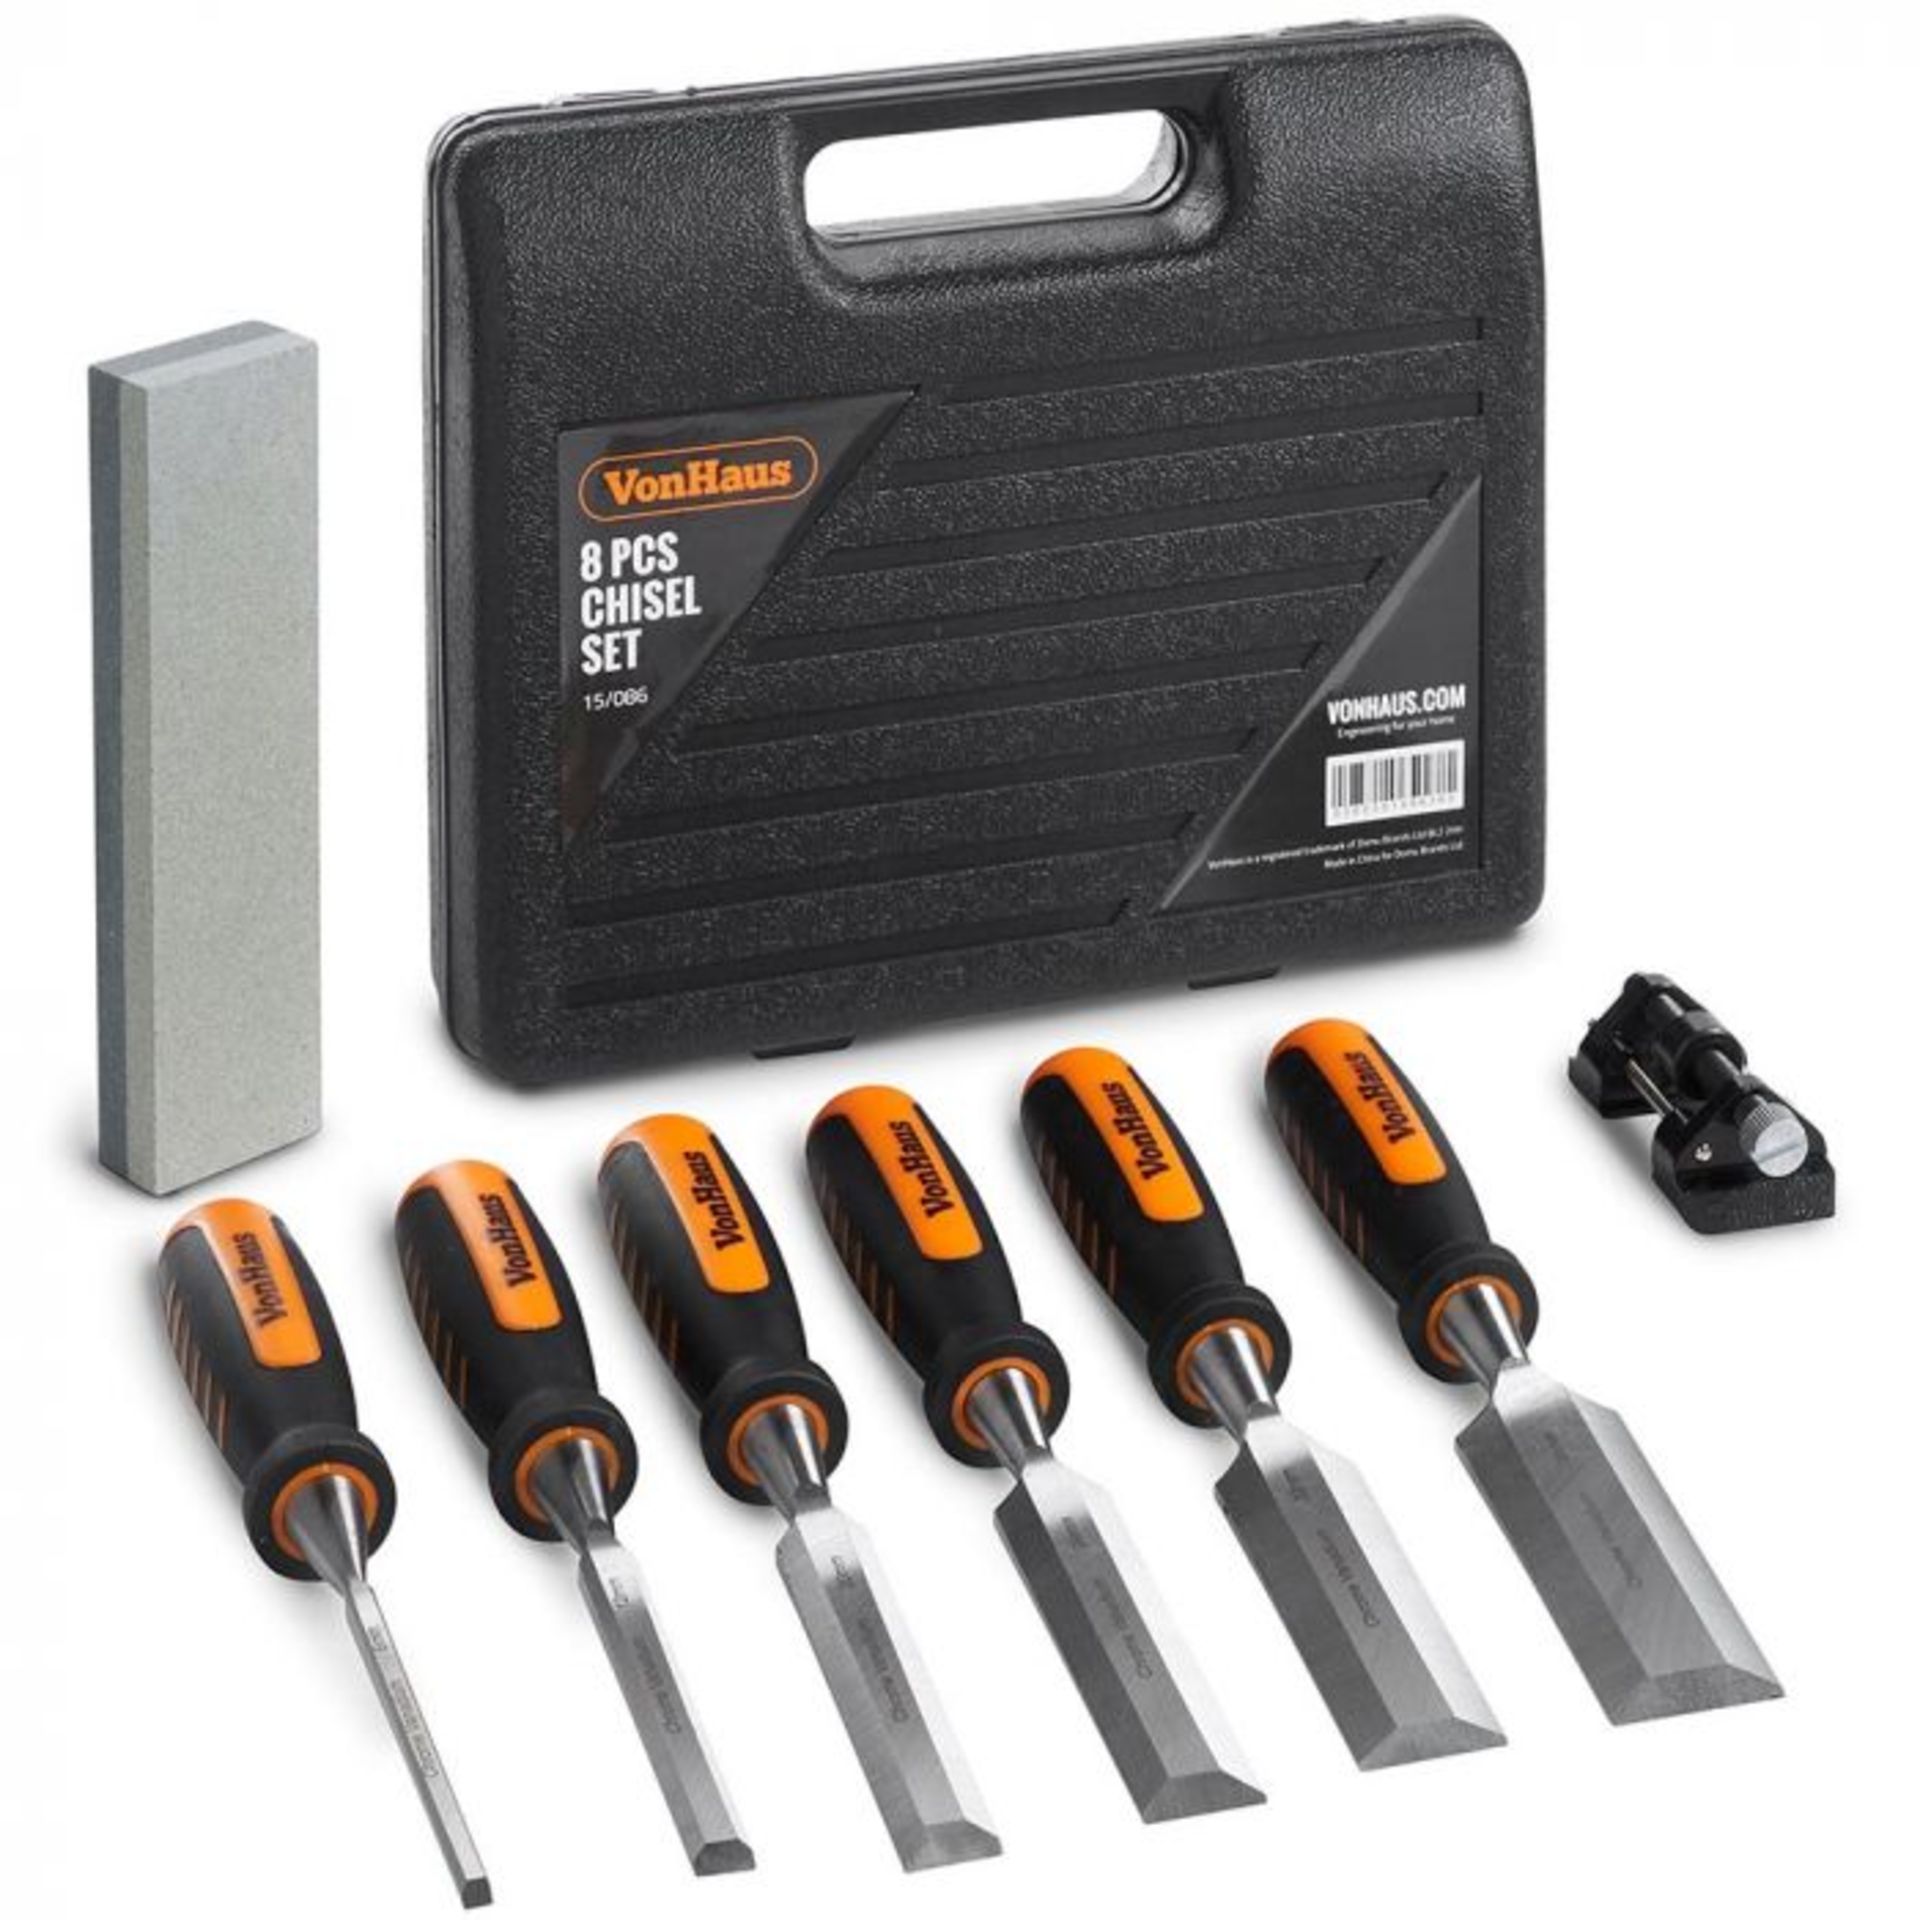 NEW BOXED, 8 Piece Wood Chisel Set, PCK- The 8 Piece Chisel Set is perfect for a range of - Image 2 of 2